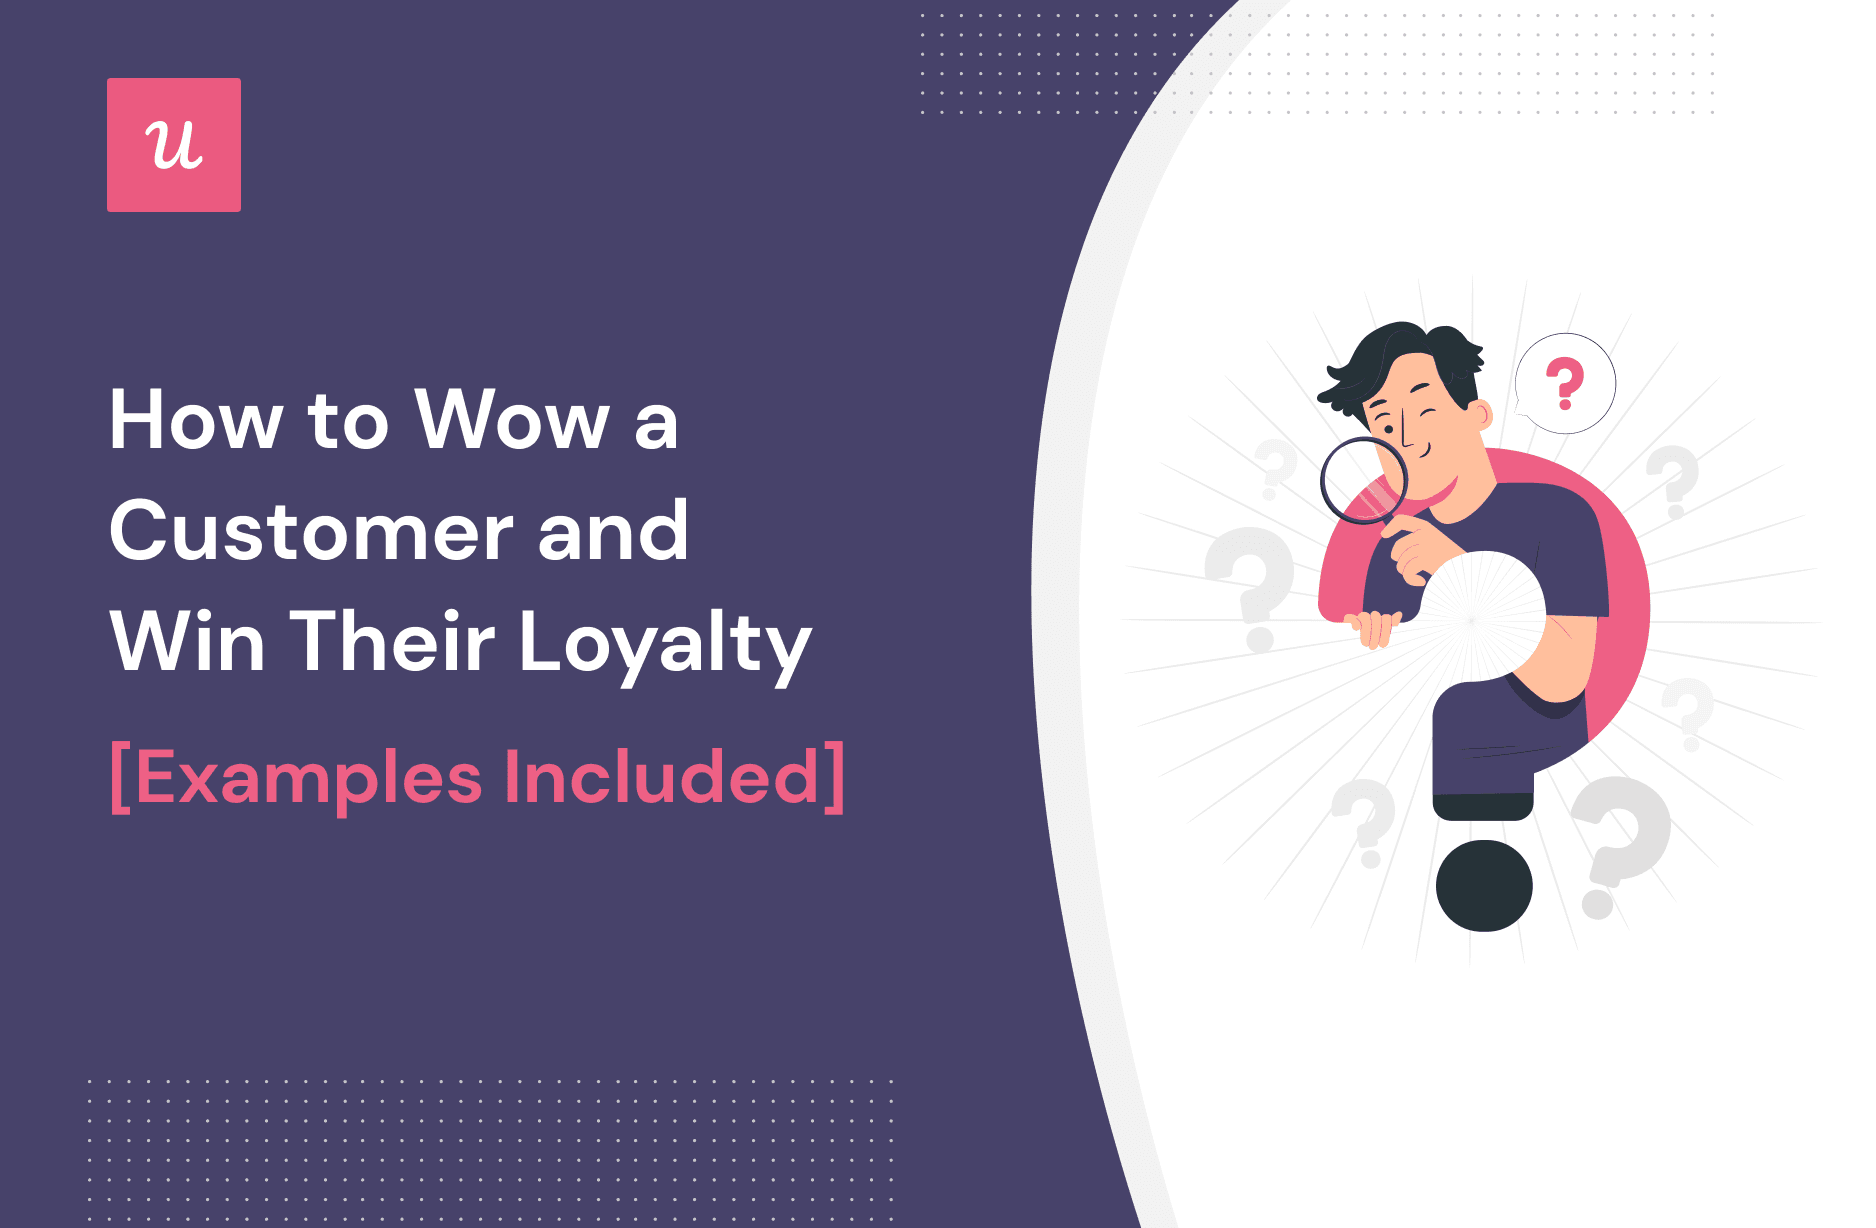 How to Wow a Customer and Win Their Loyalty [With Examples] cover